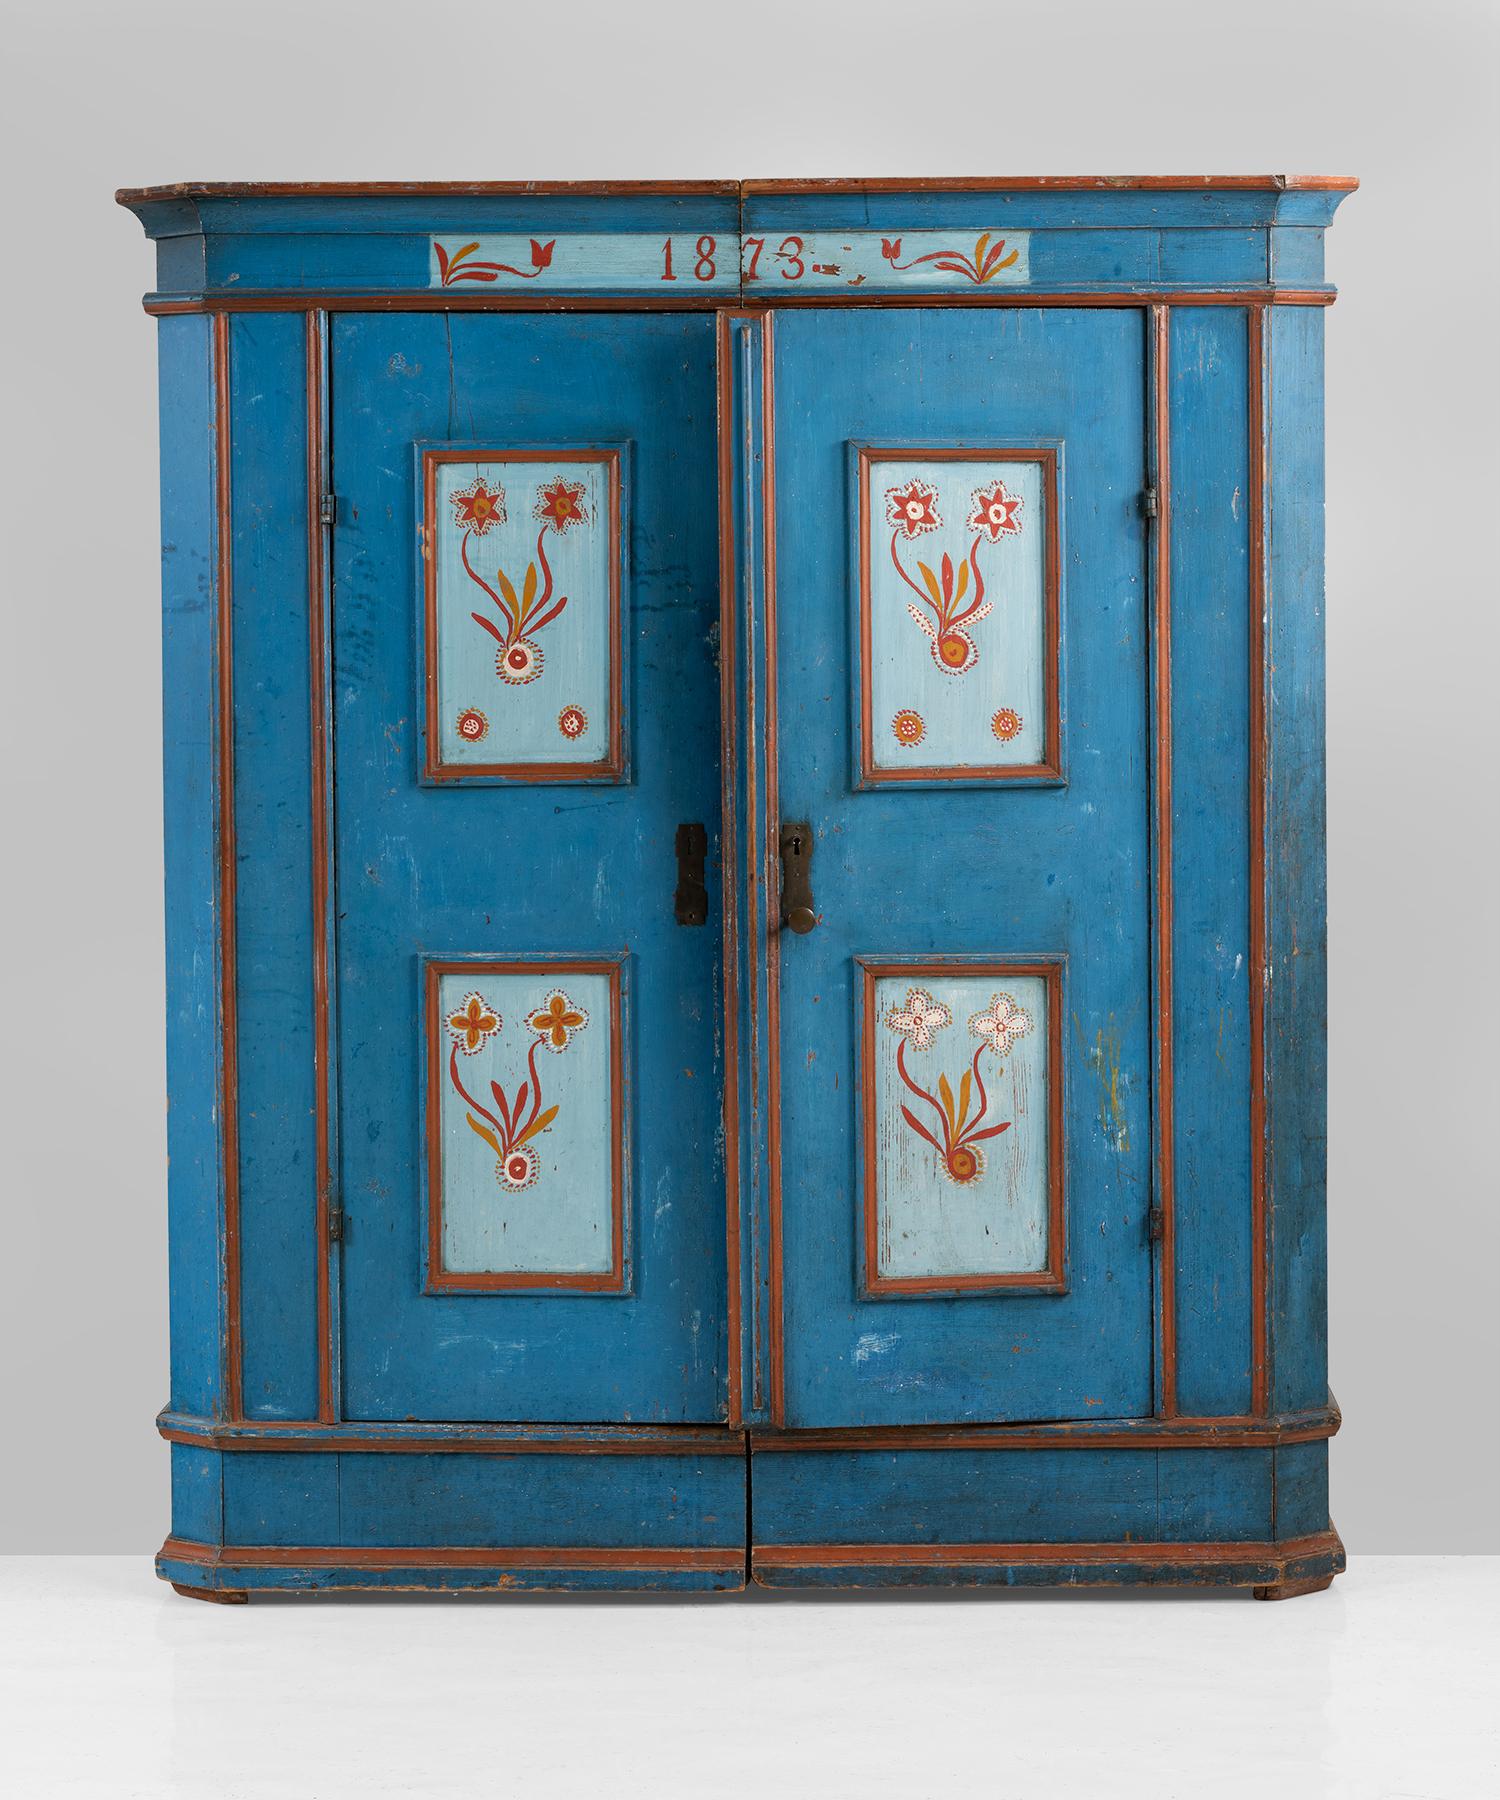 Beautifully painted cabinet in period finish, dated 1875.
  